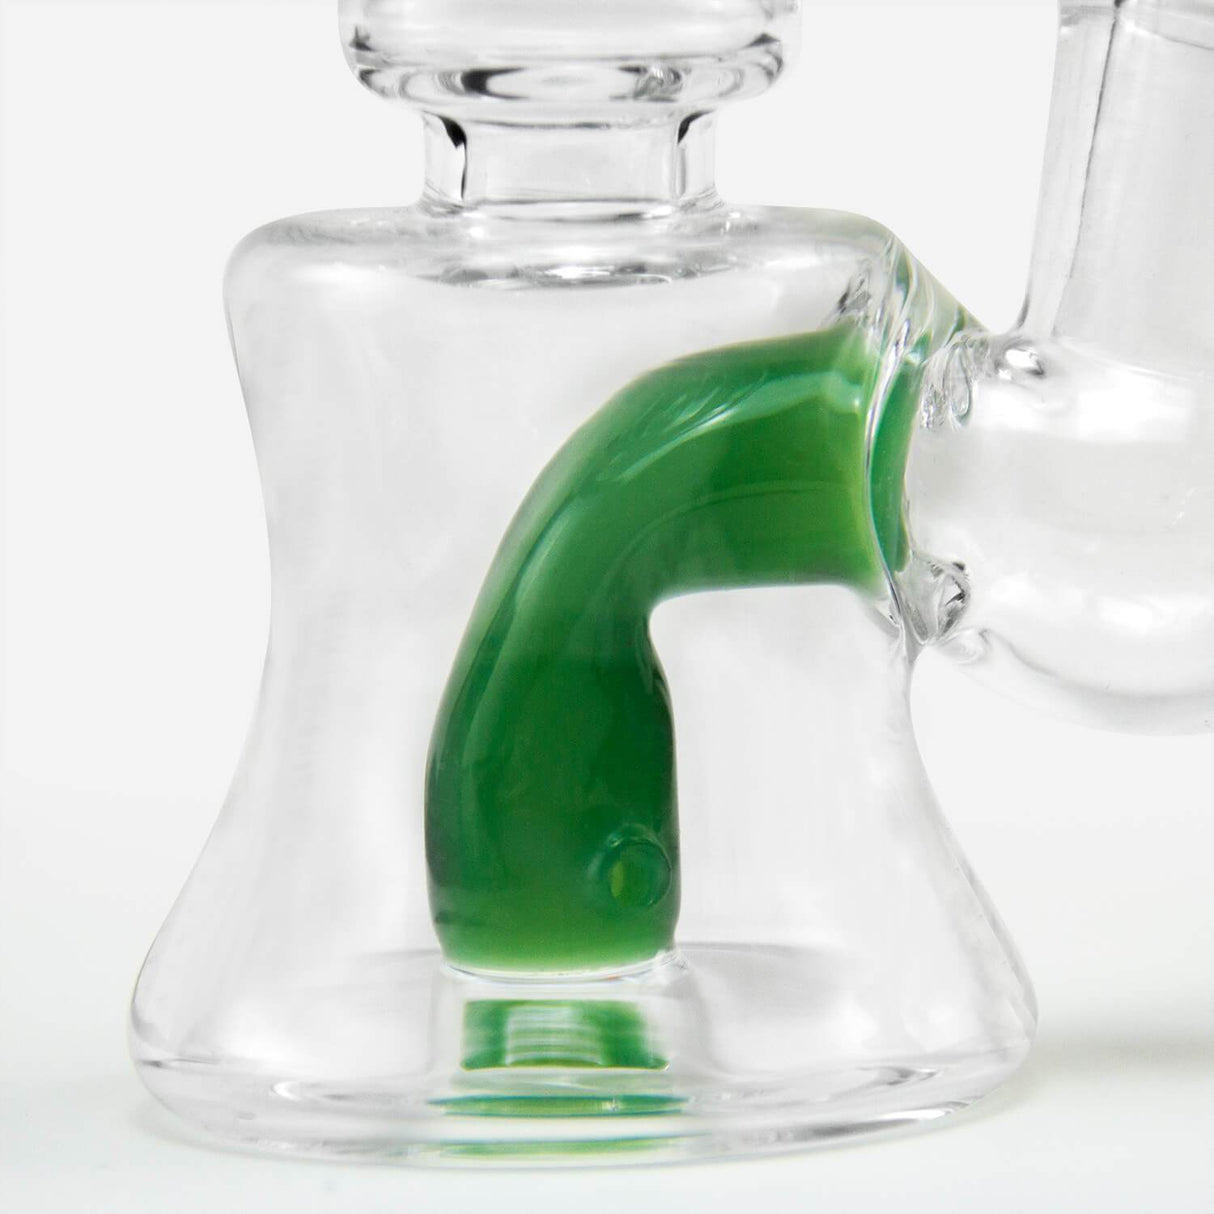 PILOT DIARY Mini Dab Rig - 4" with Green Banger Hanger Design - Close-up Side View